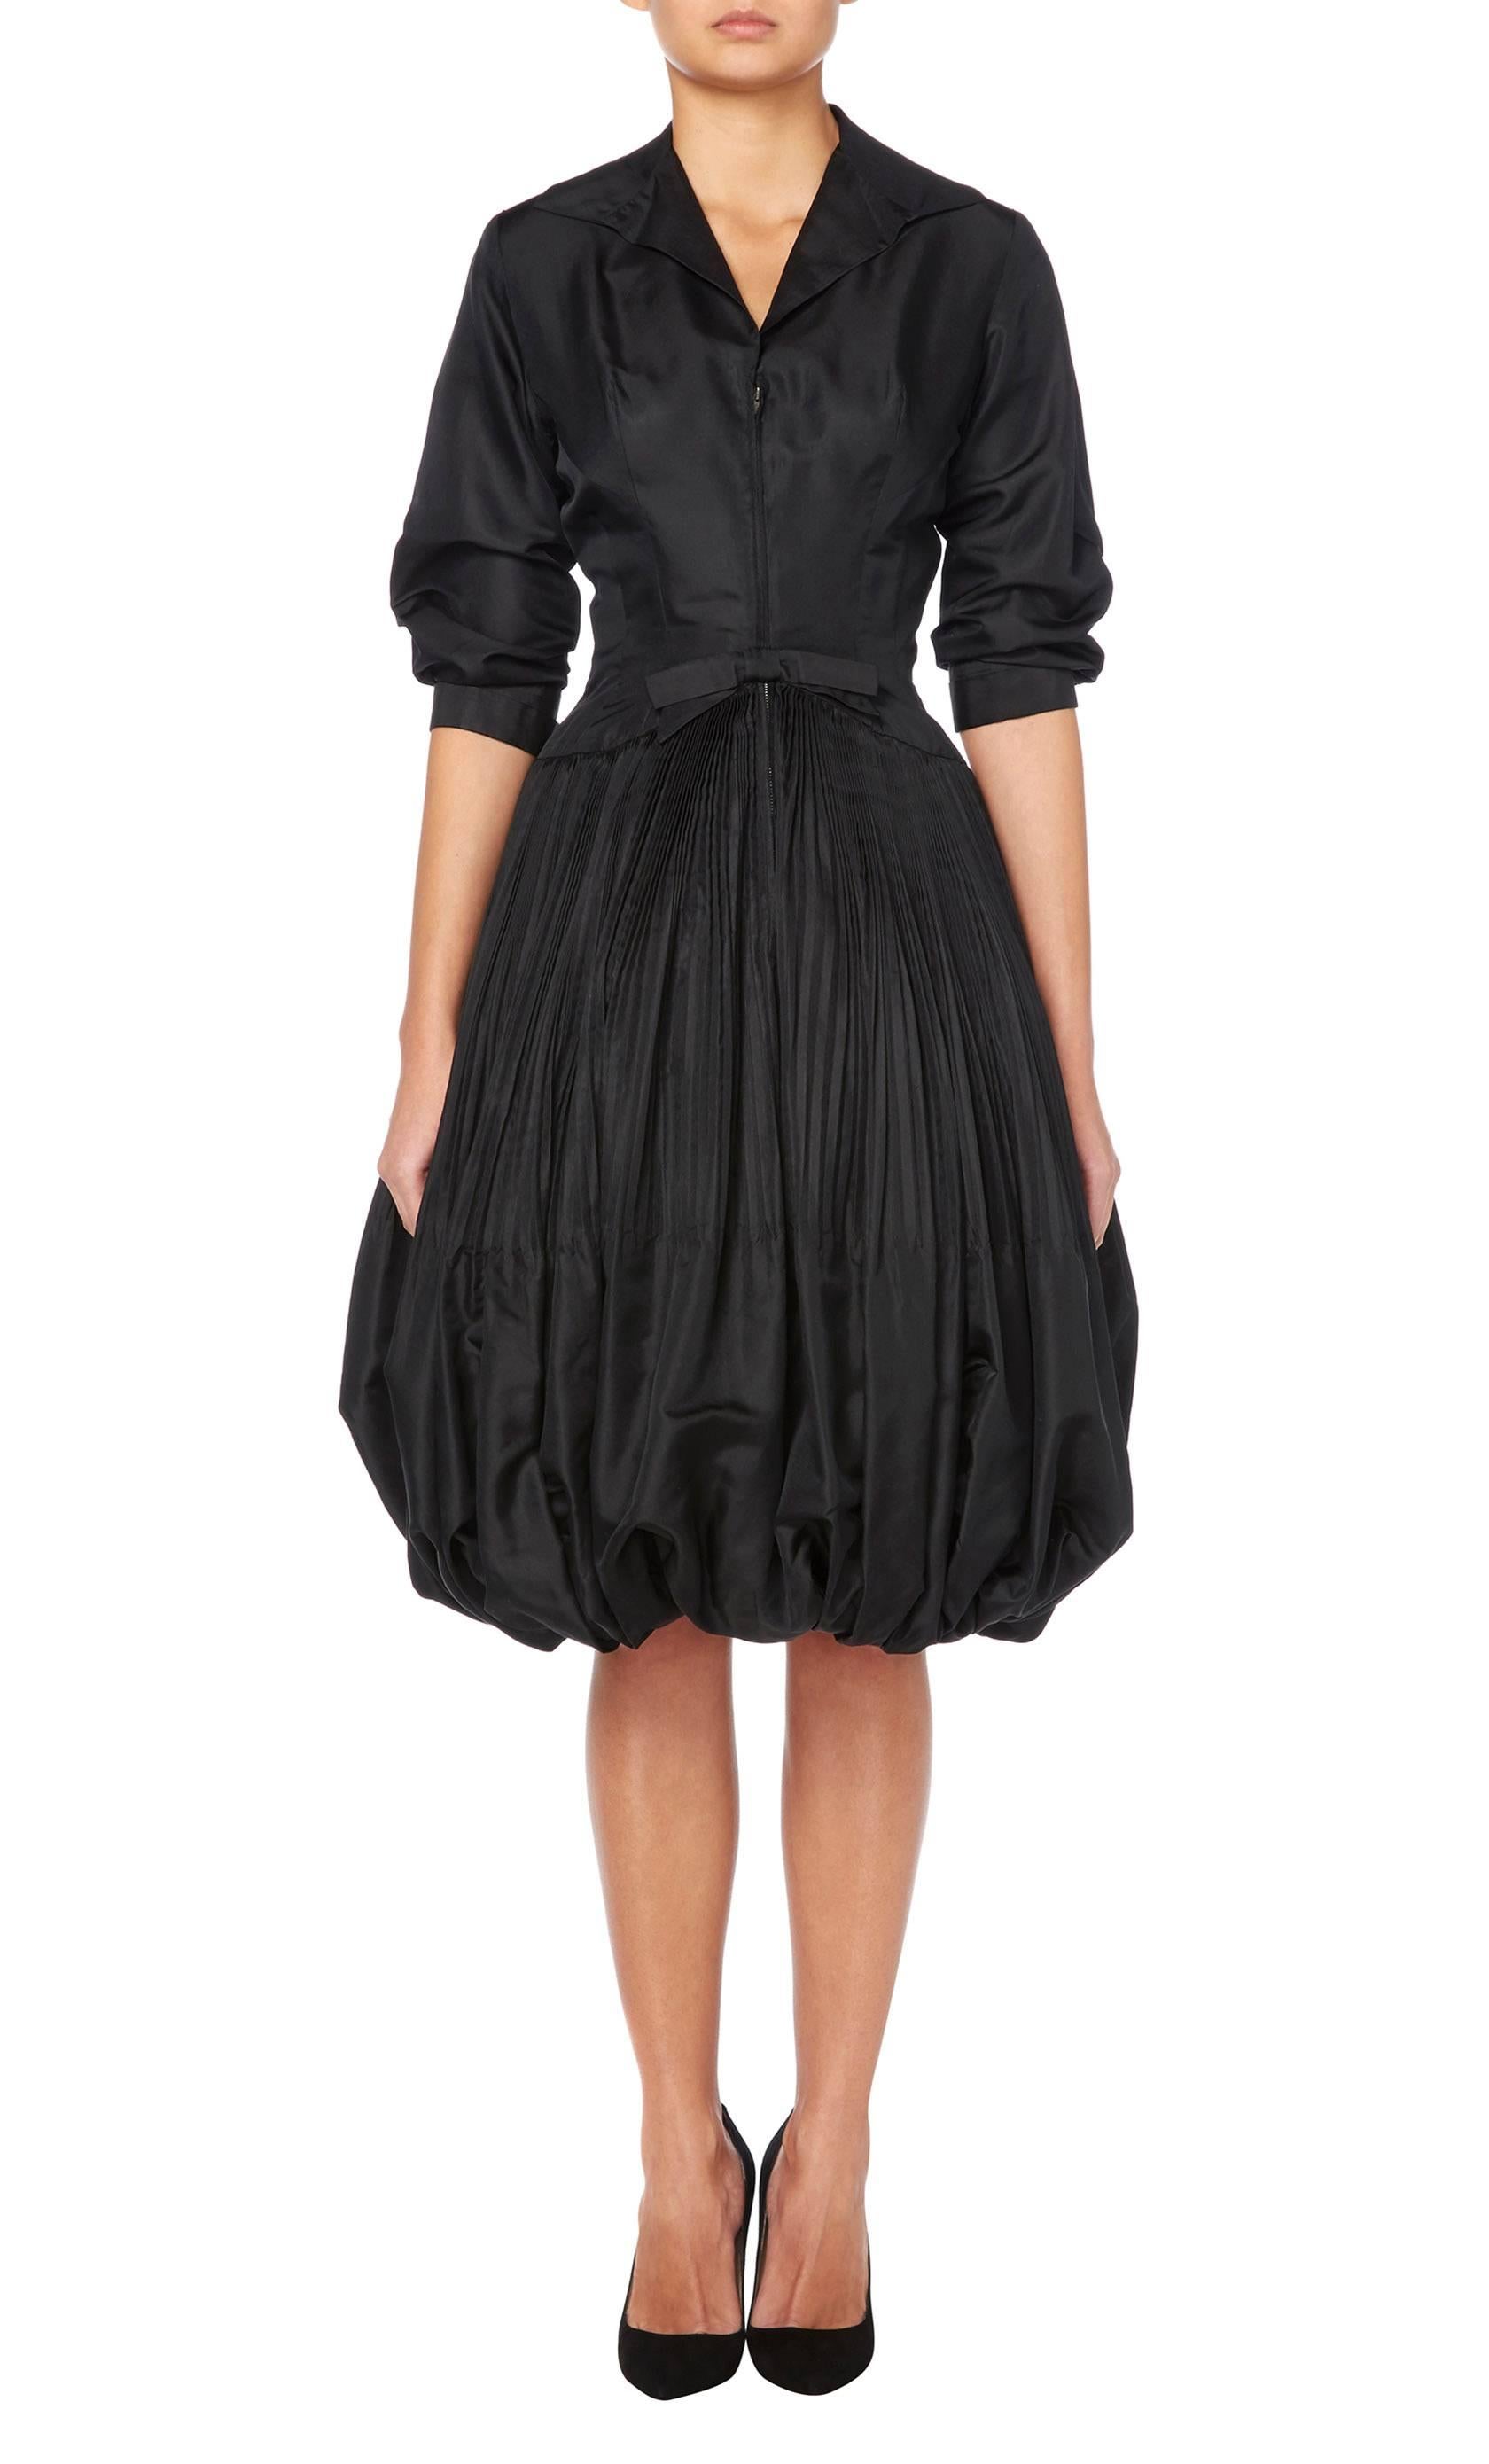 A wonderful LBD by Seymour Jacobson, this cocktail dress features a collar, three-quarter length sleeves and a full puff balled skirt with micro-pleating. A zip fastens to the front with a bow detail on the waist, making this beautifully tailored